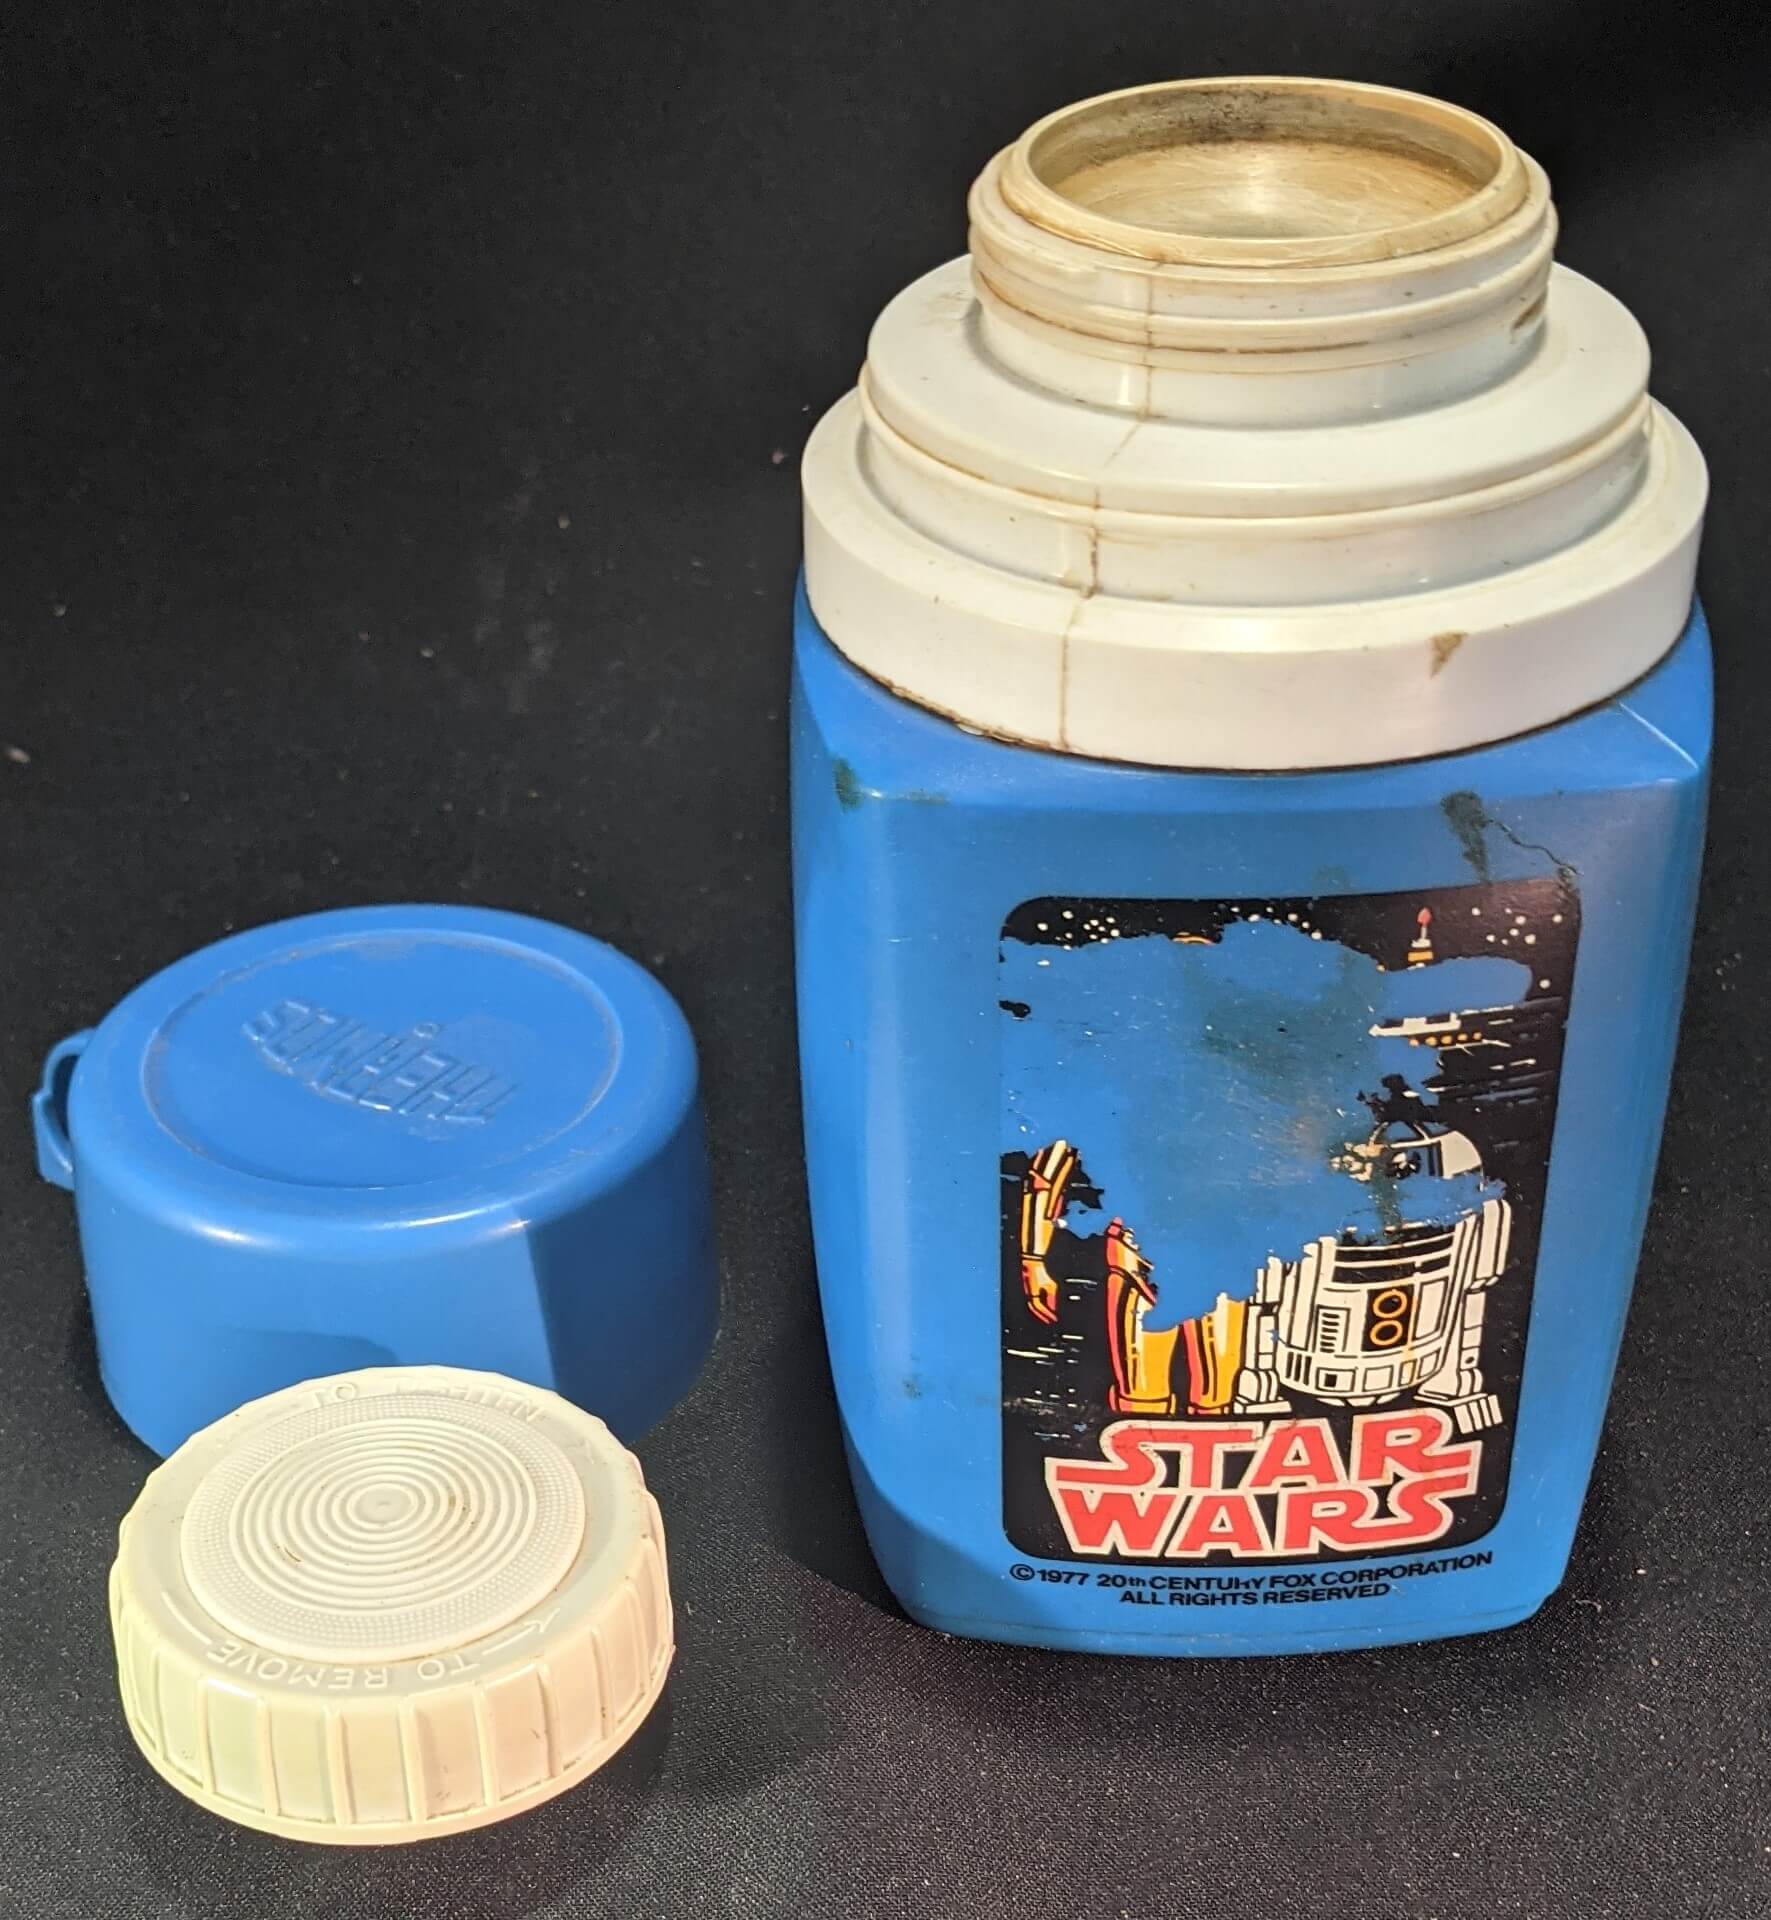 Star Wars Return of the Jedi Lunch Box with Thermos Bottle